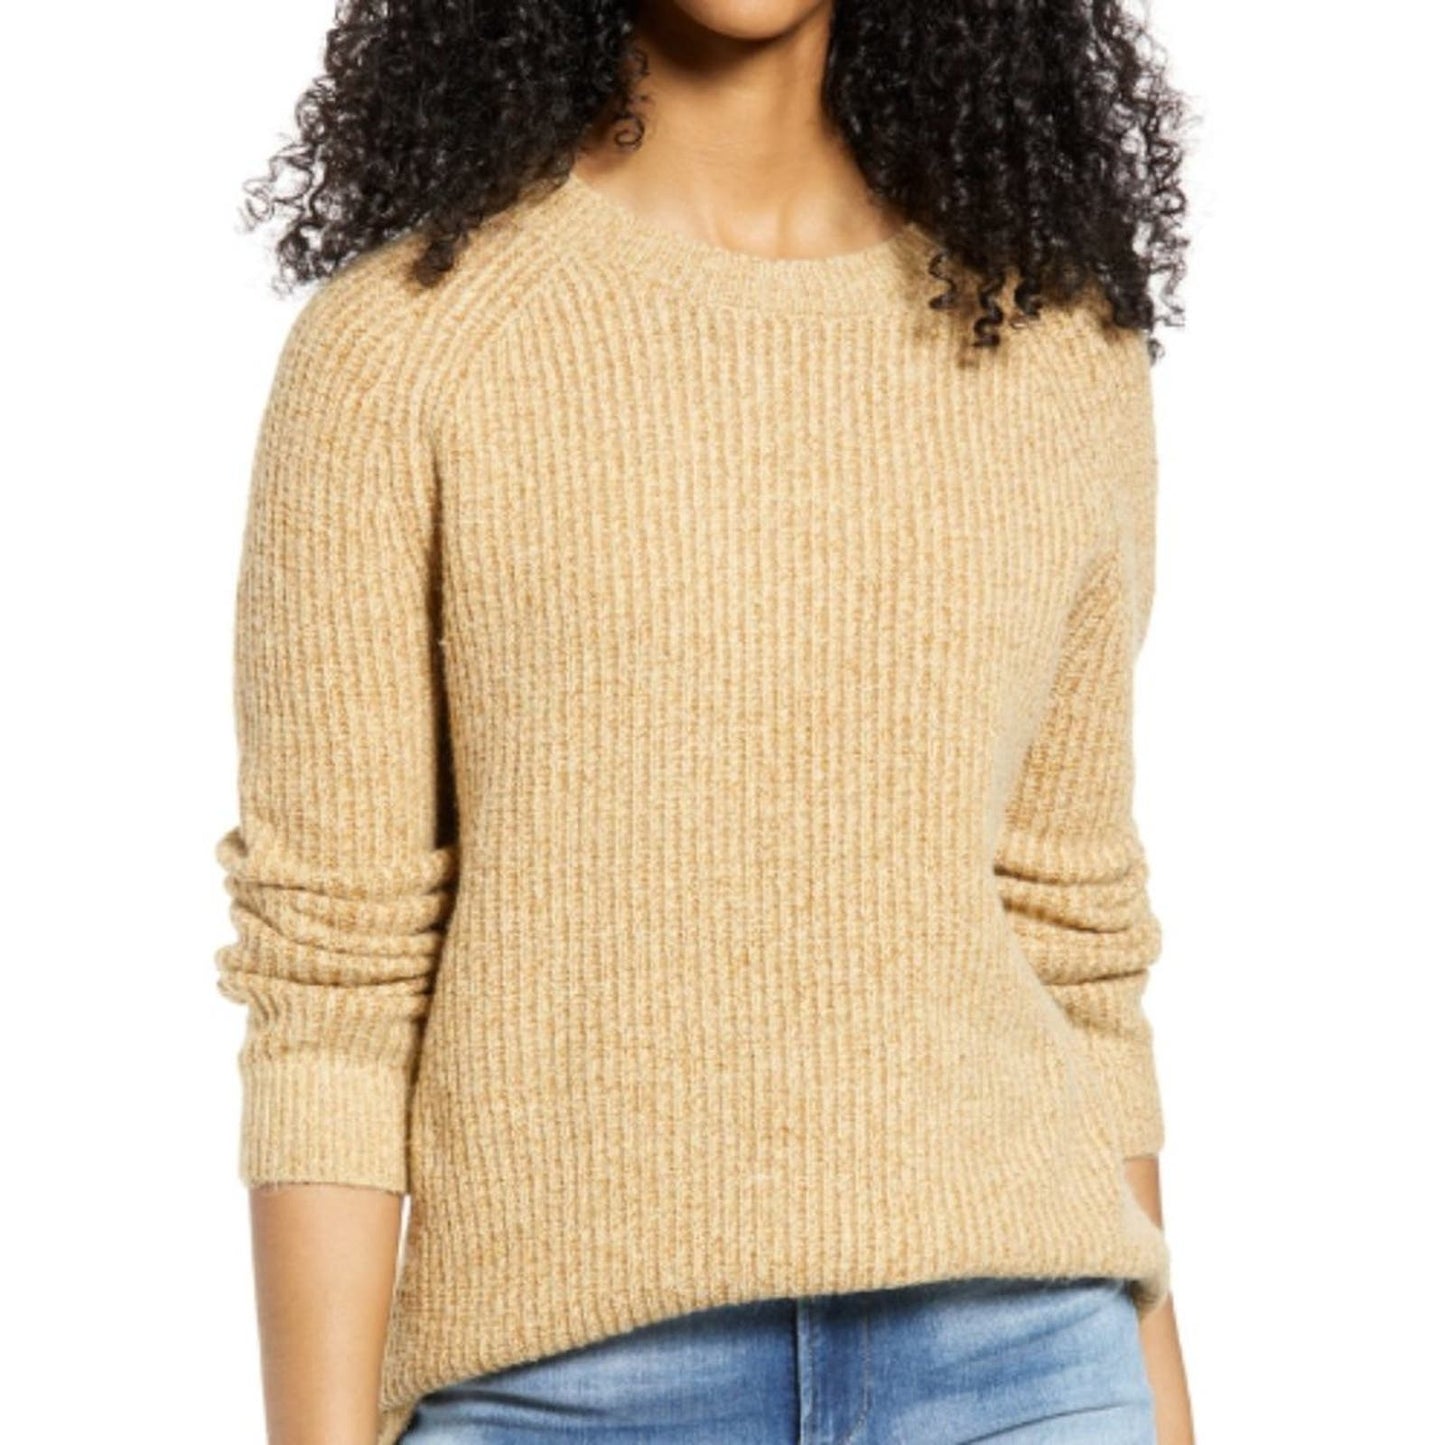 Nordstrom BP Plaited Stitch Recycled Blend Crewneck Sweater NWT